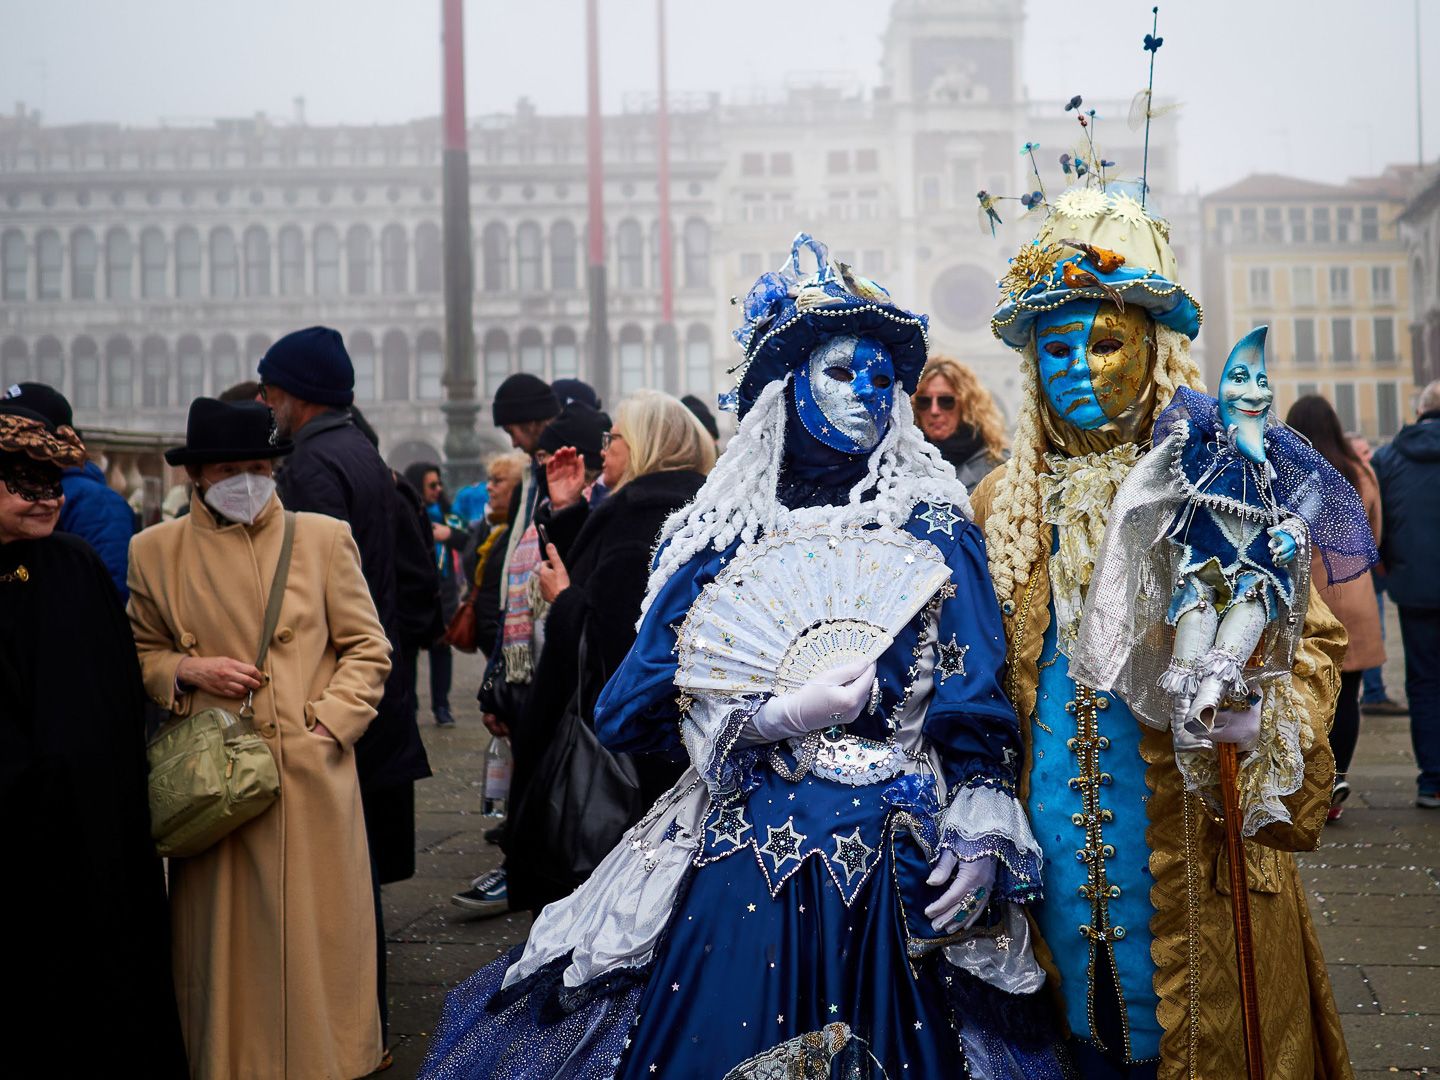 The Carnival of Venice - Italy